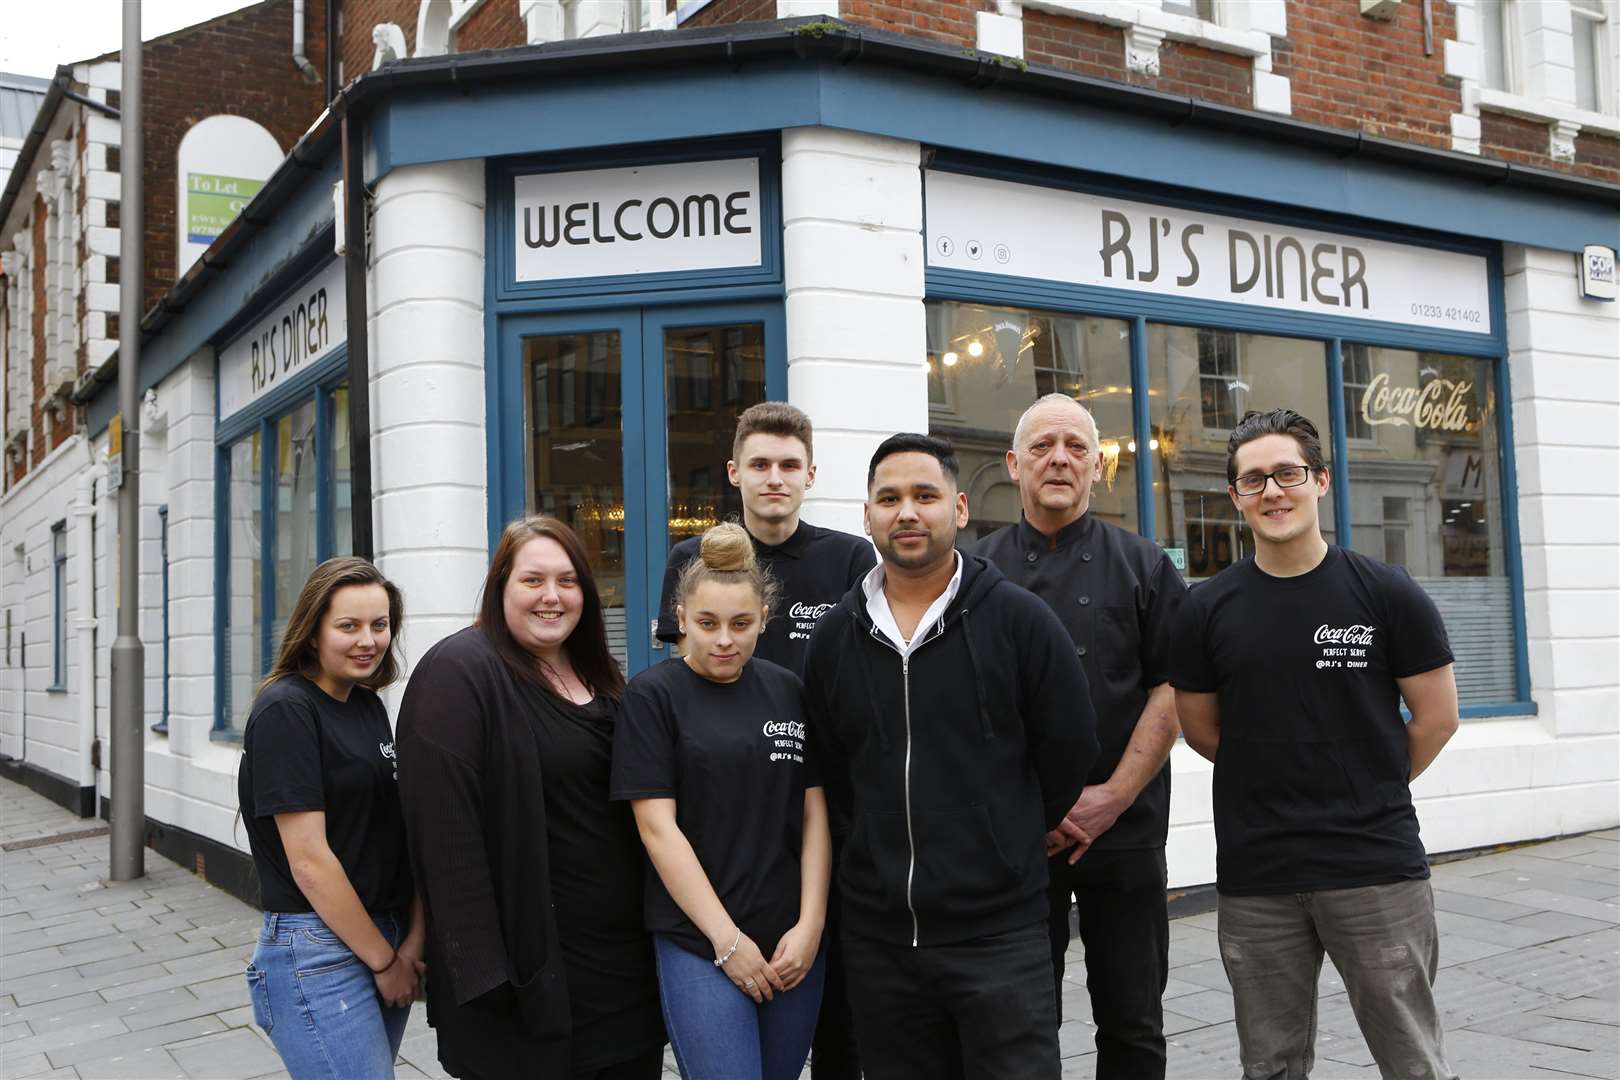 RJ's Diner opened in Bank Street last year, but will now have competition from another American diner in Kennington